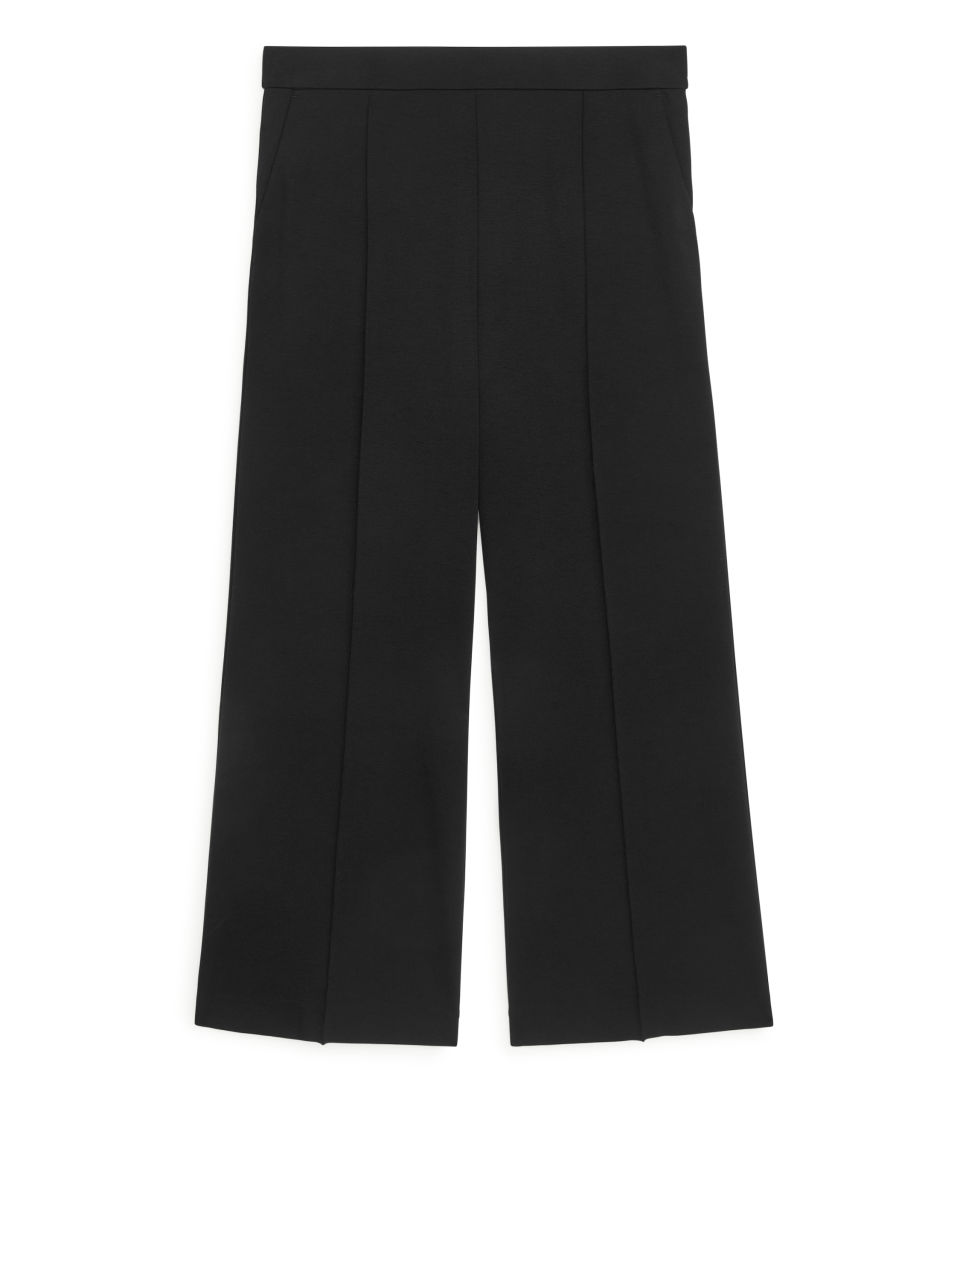 Arket Cropped Milano Rib Trousers